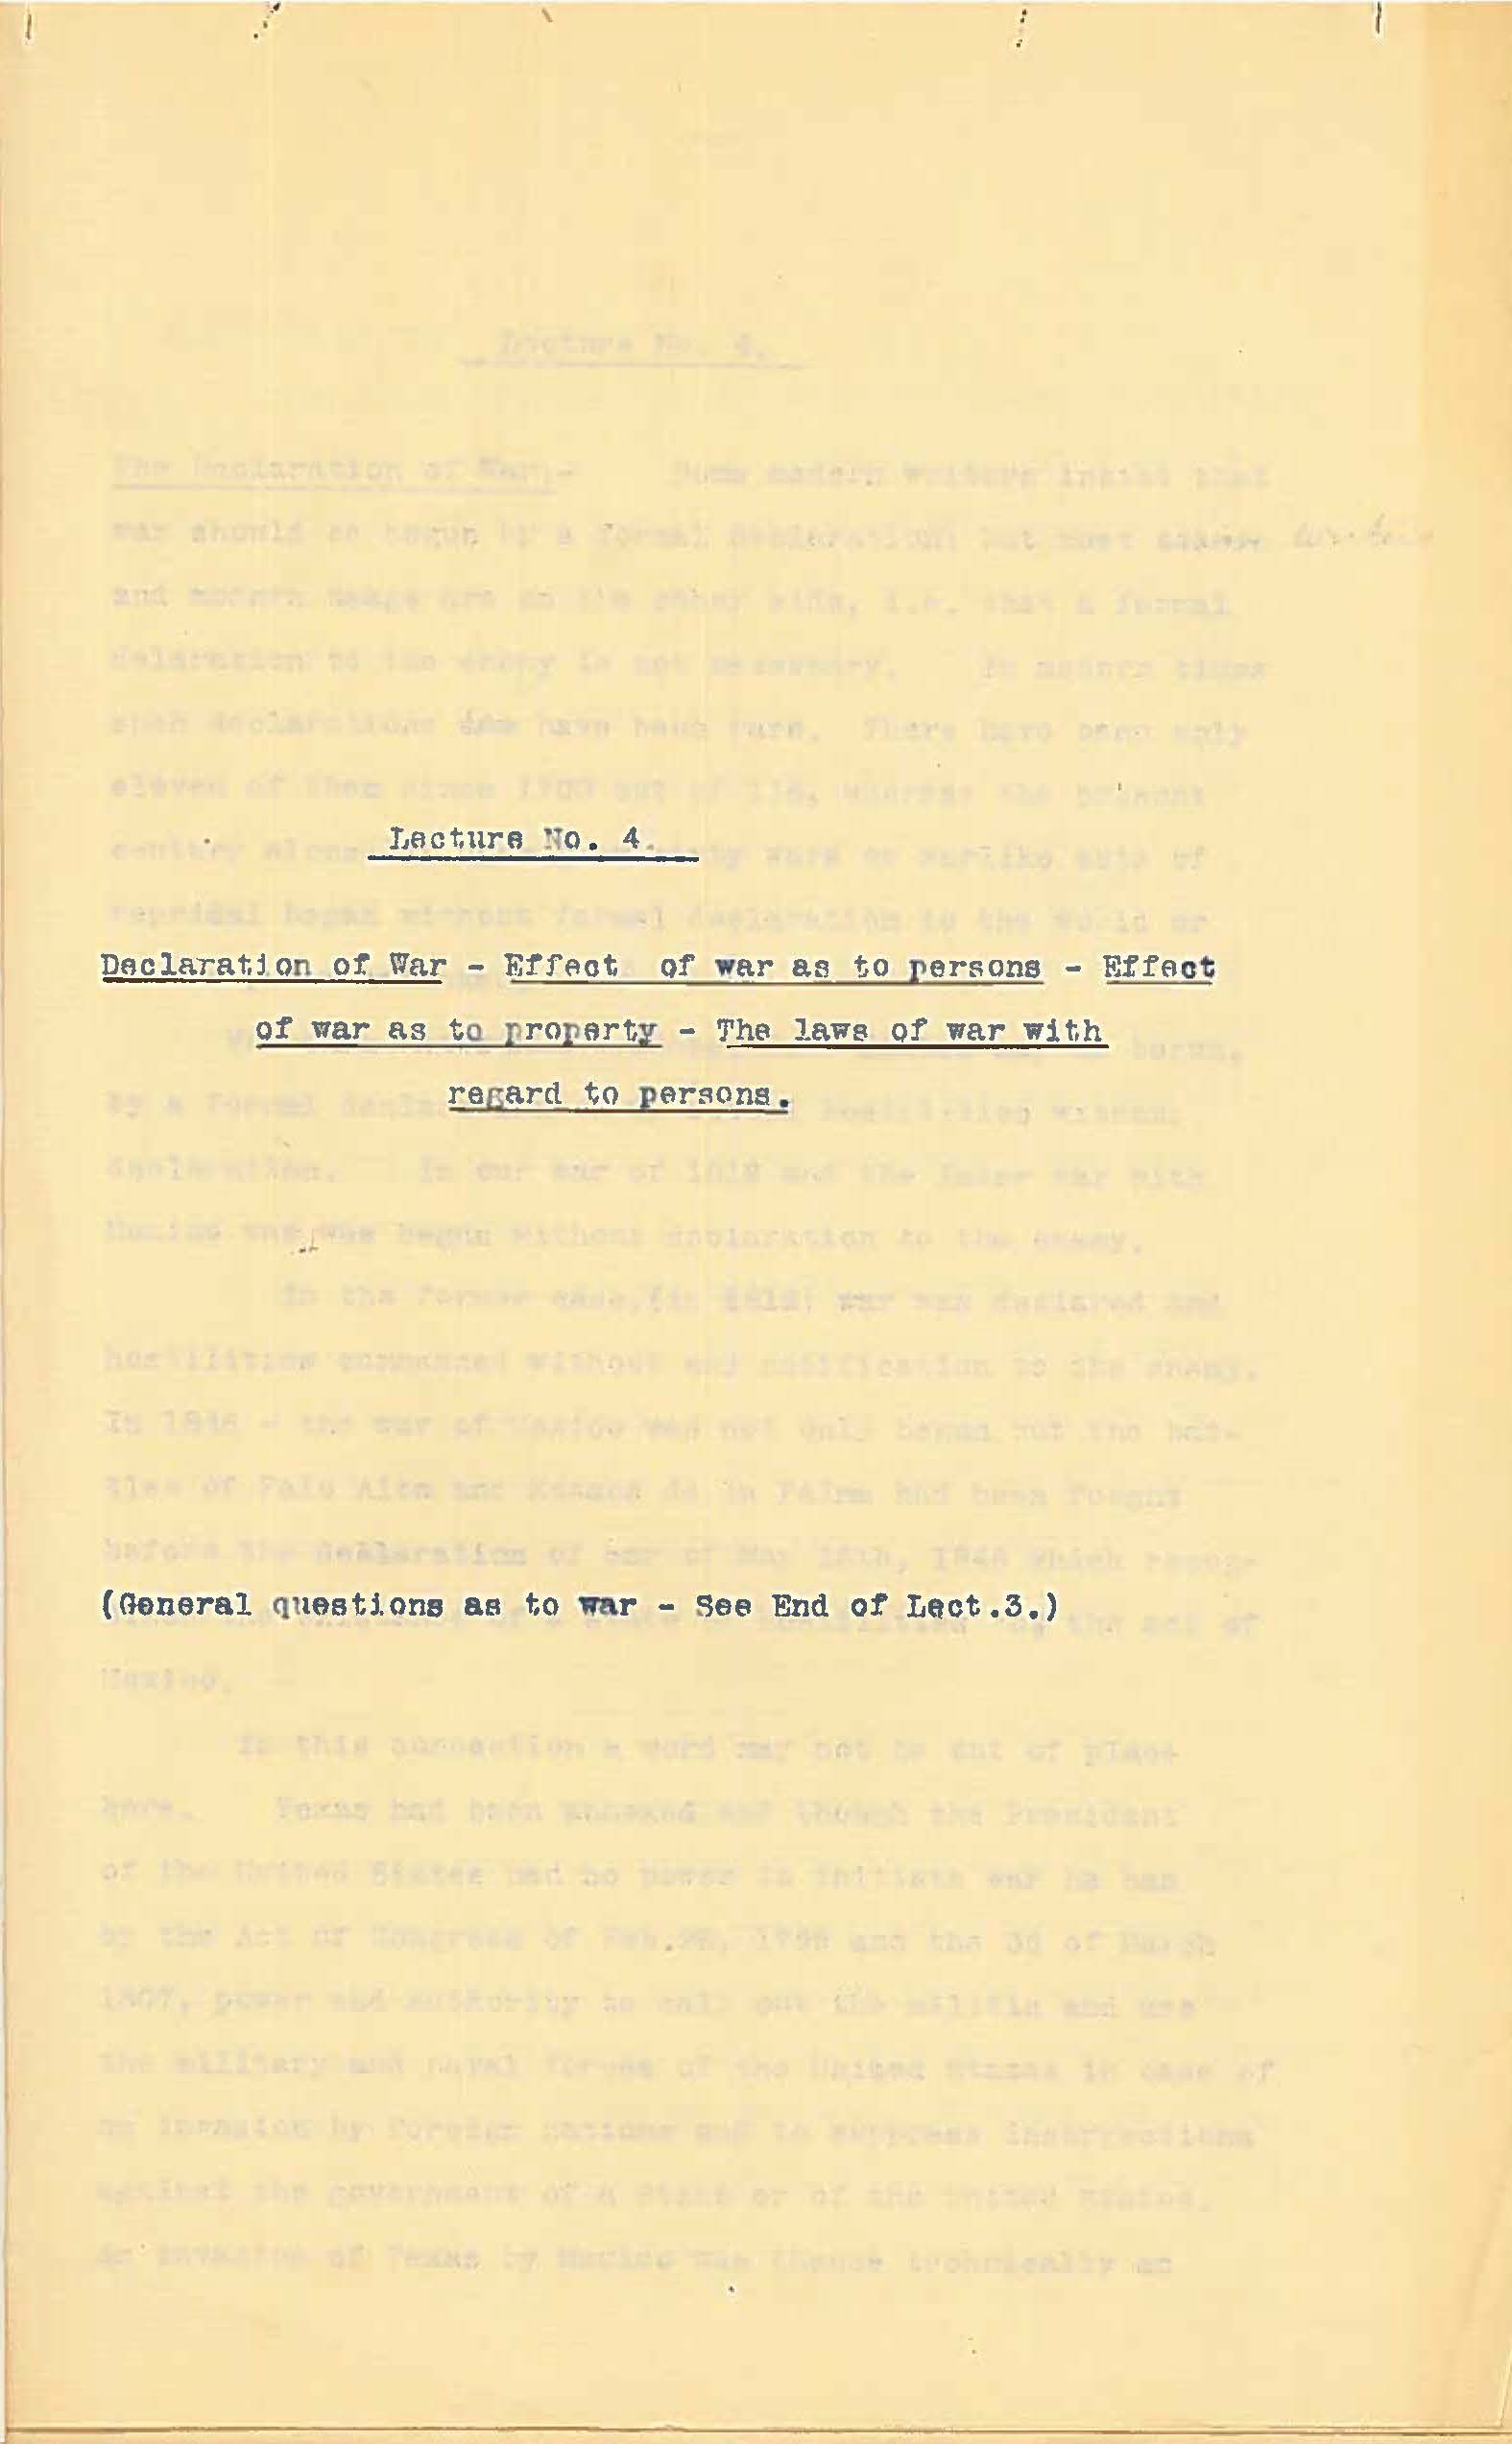 International Law, Lecture No.4 - Declaration of War. Effect of war as to persons. Effect of war as to property. The laws of war with regard to persons, Charles H. Stockton